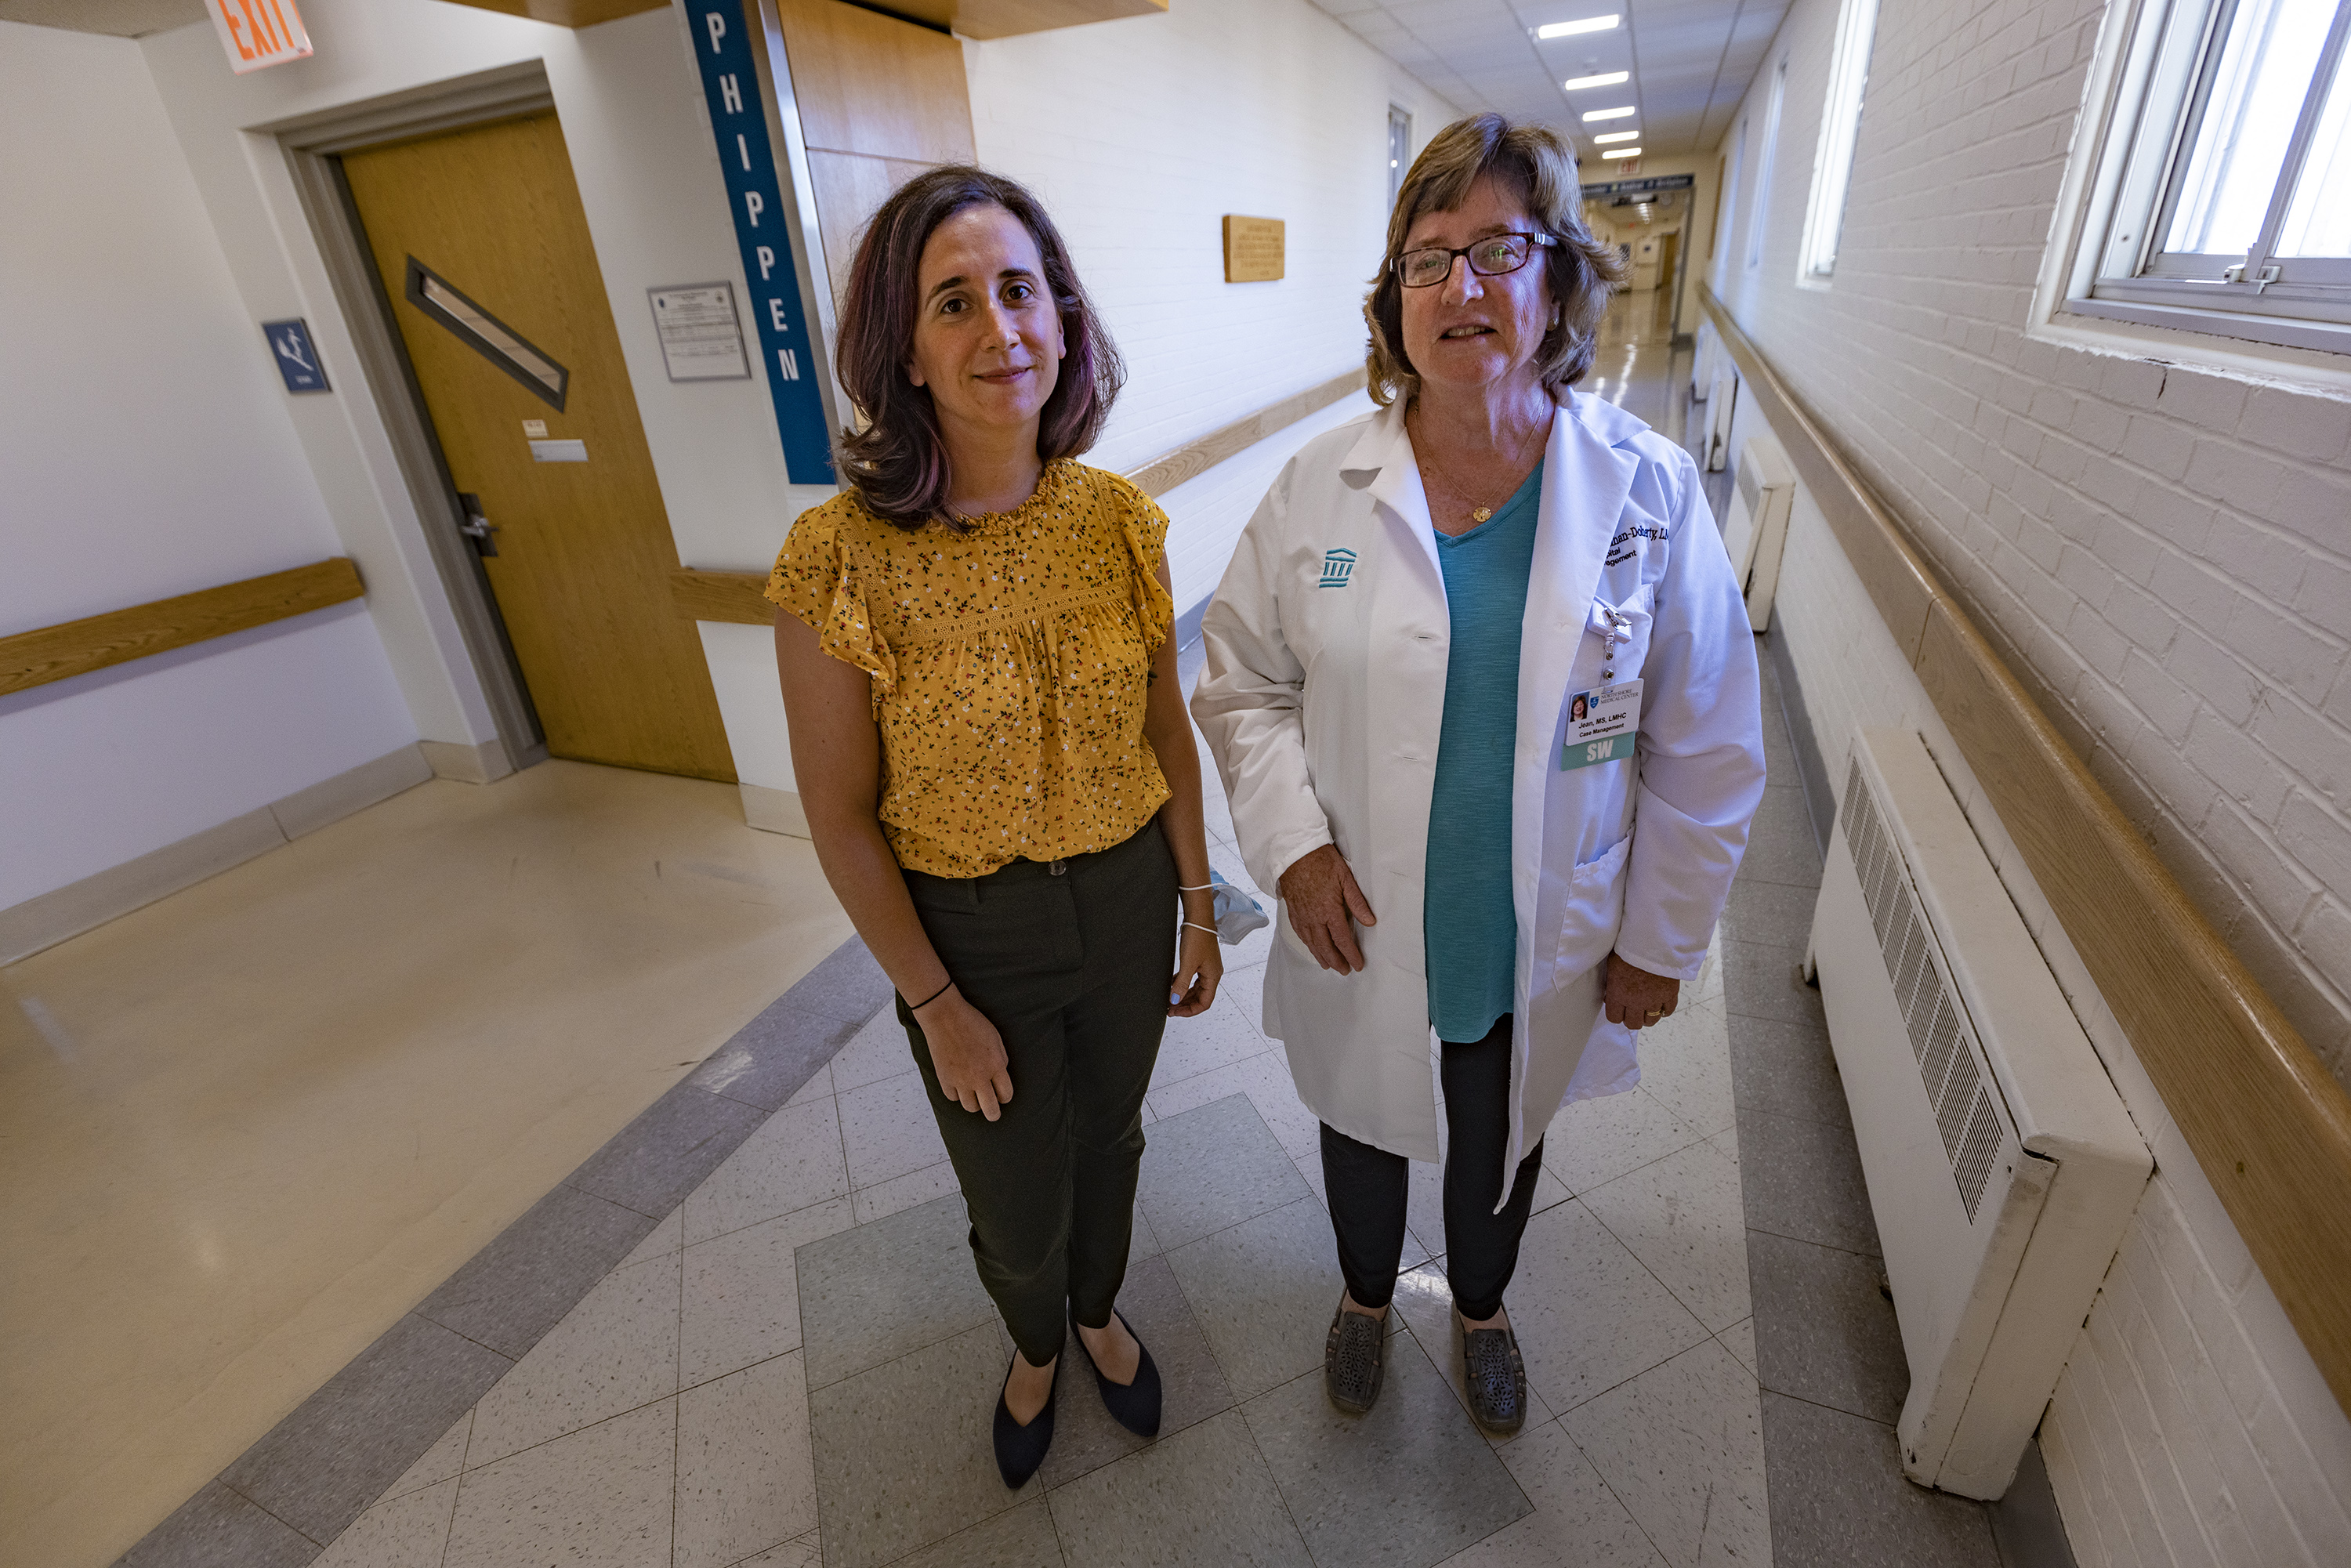 One photo shows Liz Tadie and Jean Monahan-Doherty standing together inside a hospital.